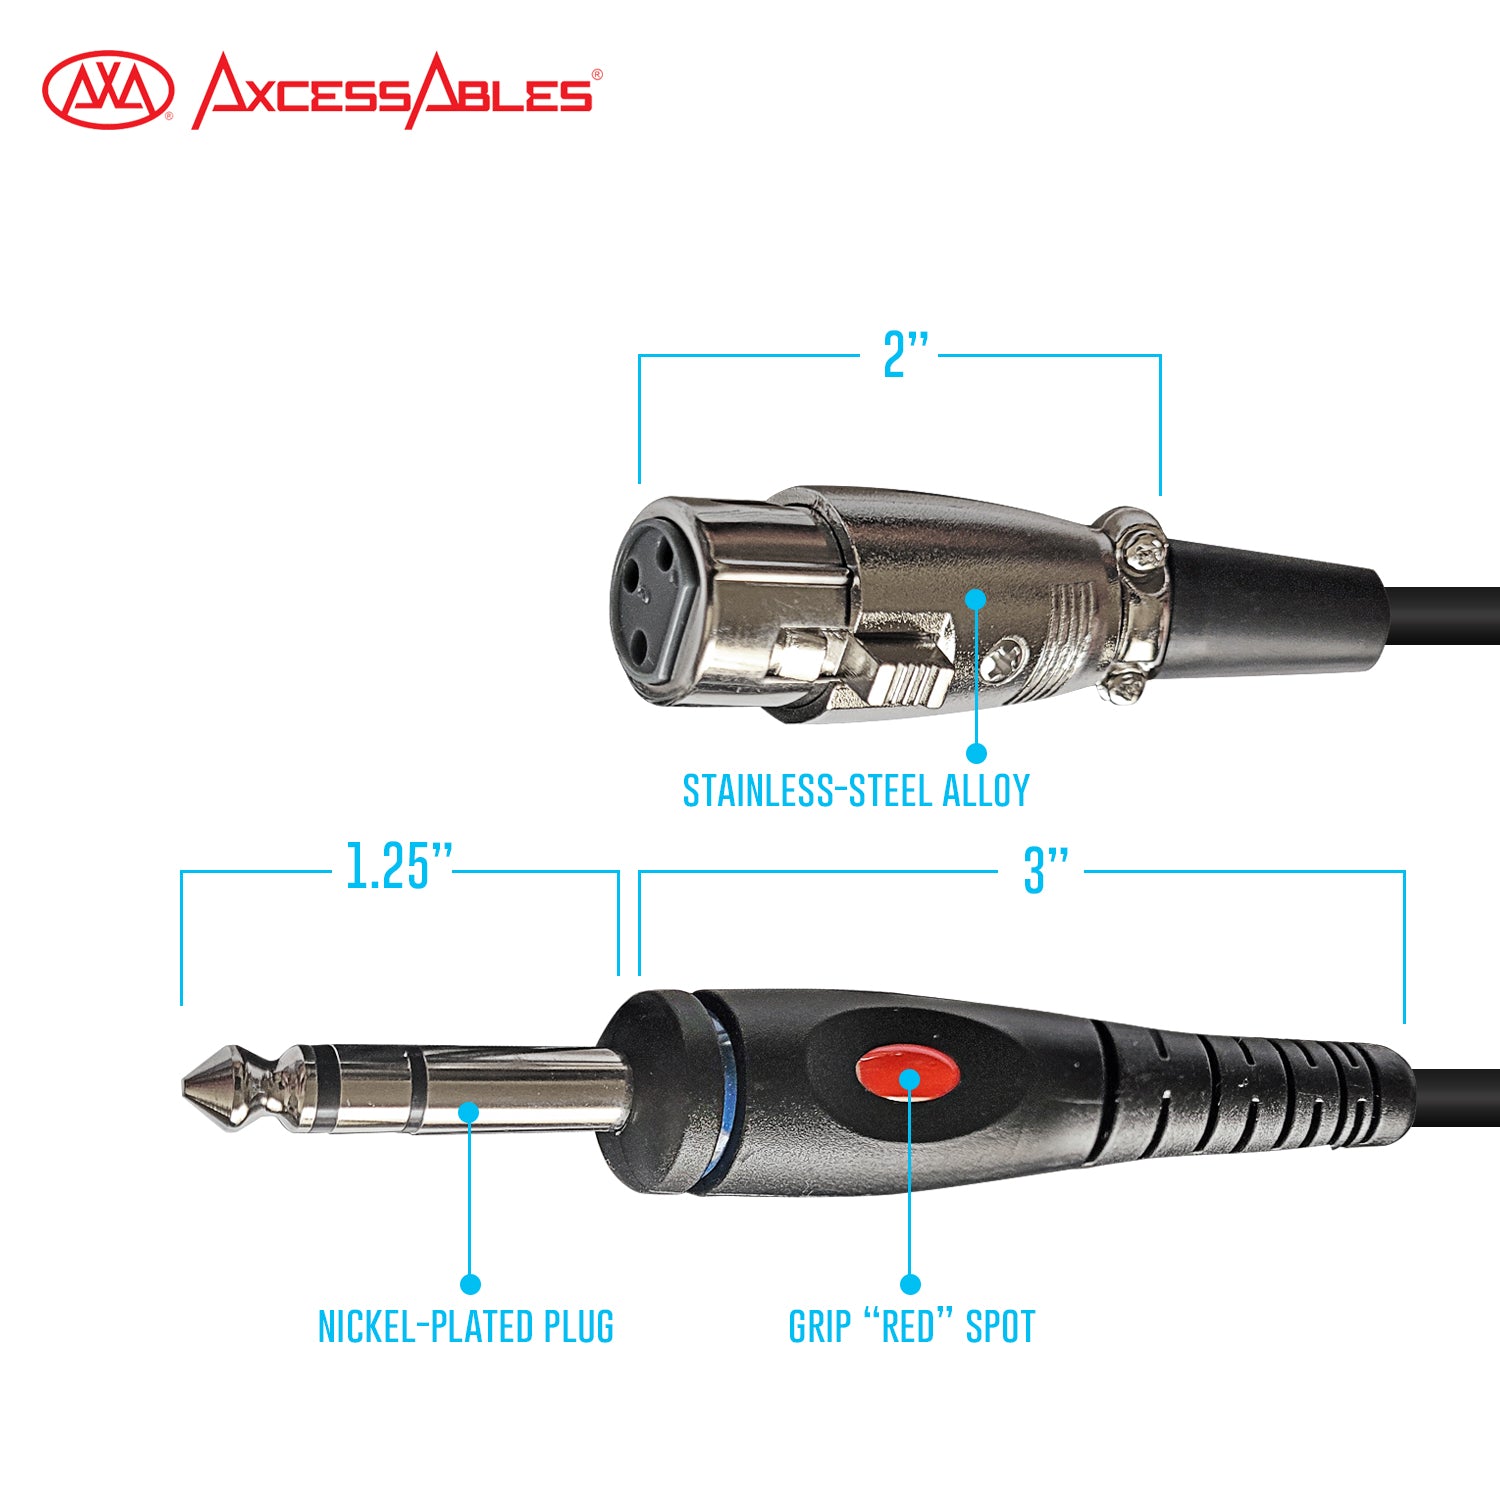 AxcessAbles TRS18-DXLR402M 1/8-inch (3.5mm) Stereo Minijack TRS to Dual XLR  Male Audio Cable for Phone, Laptop, Tablet, MP3 Player Patch to Mixing